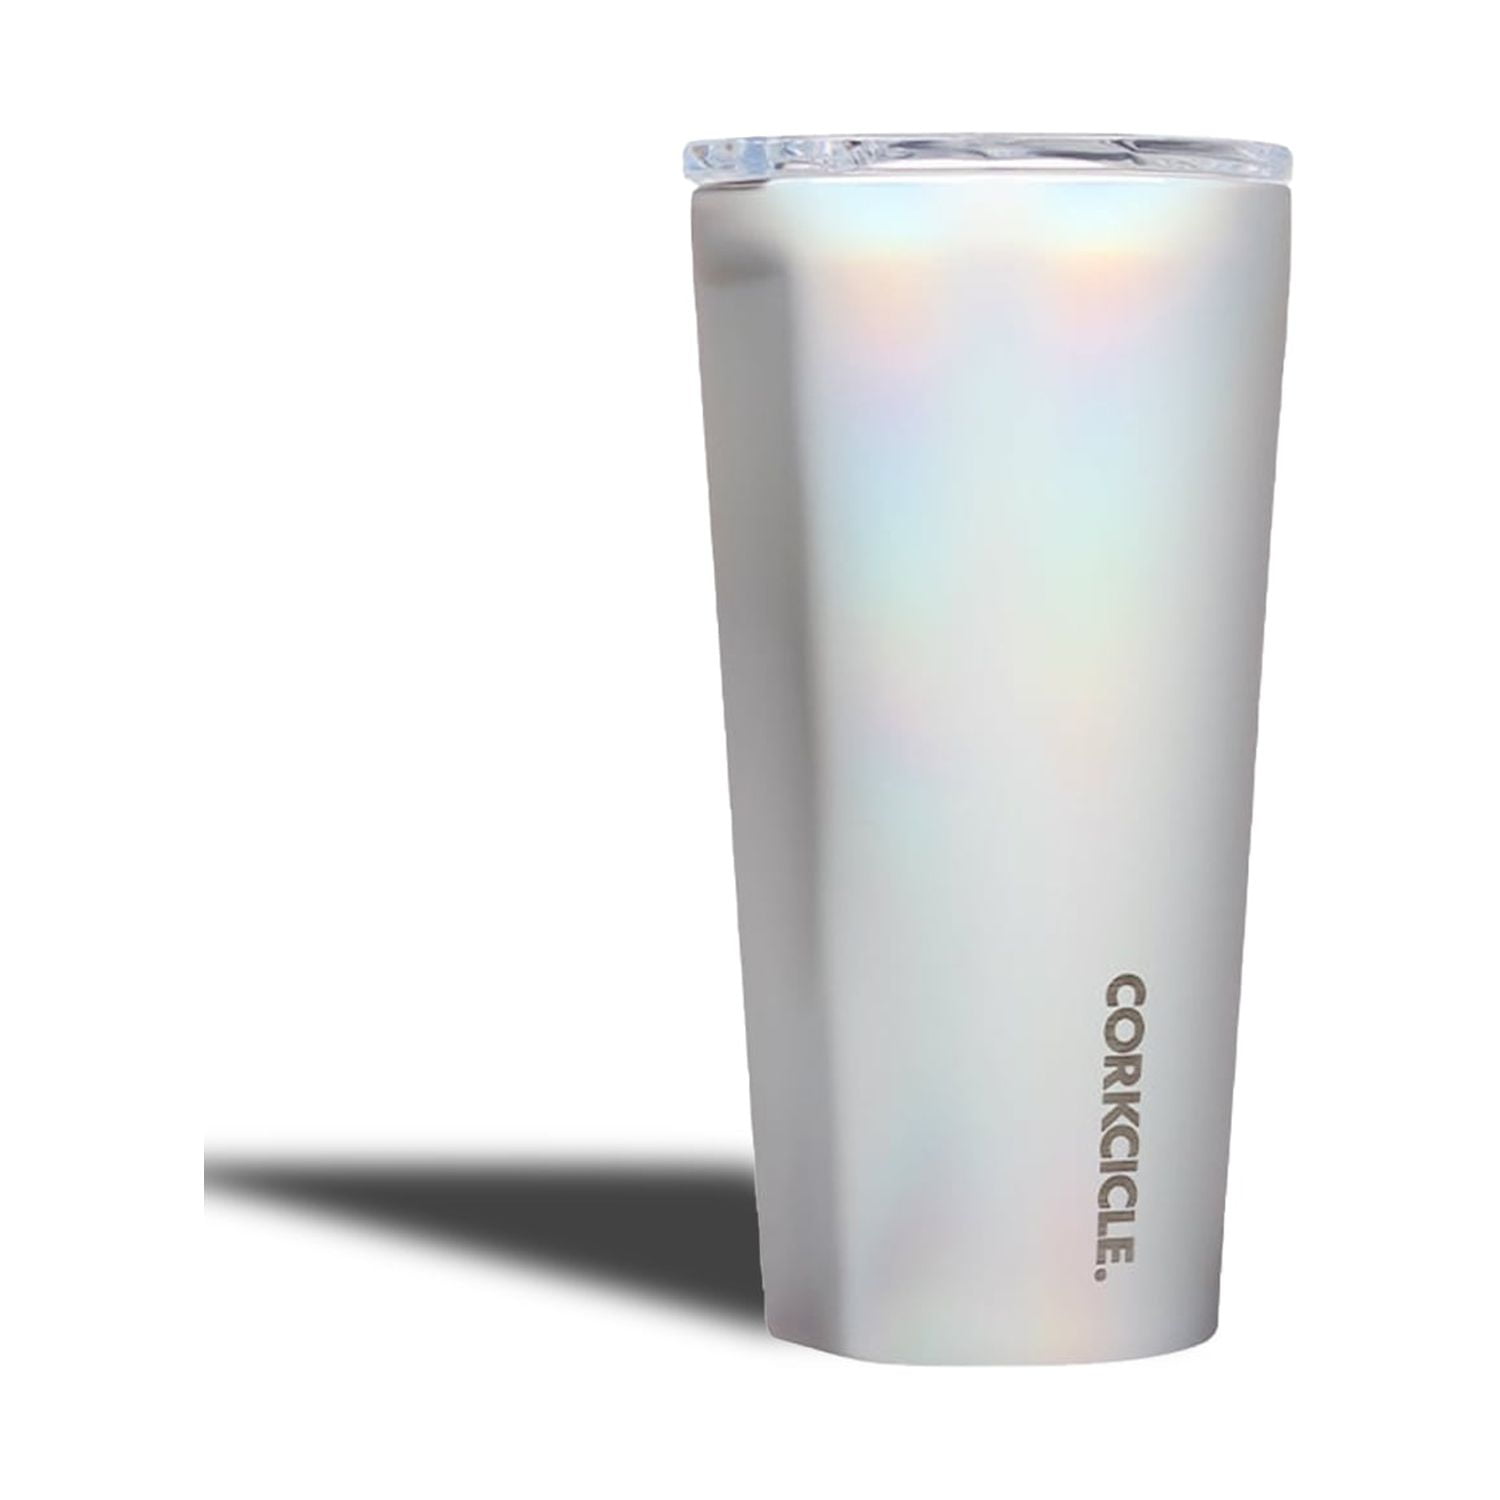 Corkcicle, 24oz Tumbler with Stainless Steel Straw, Unicorn